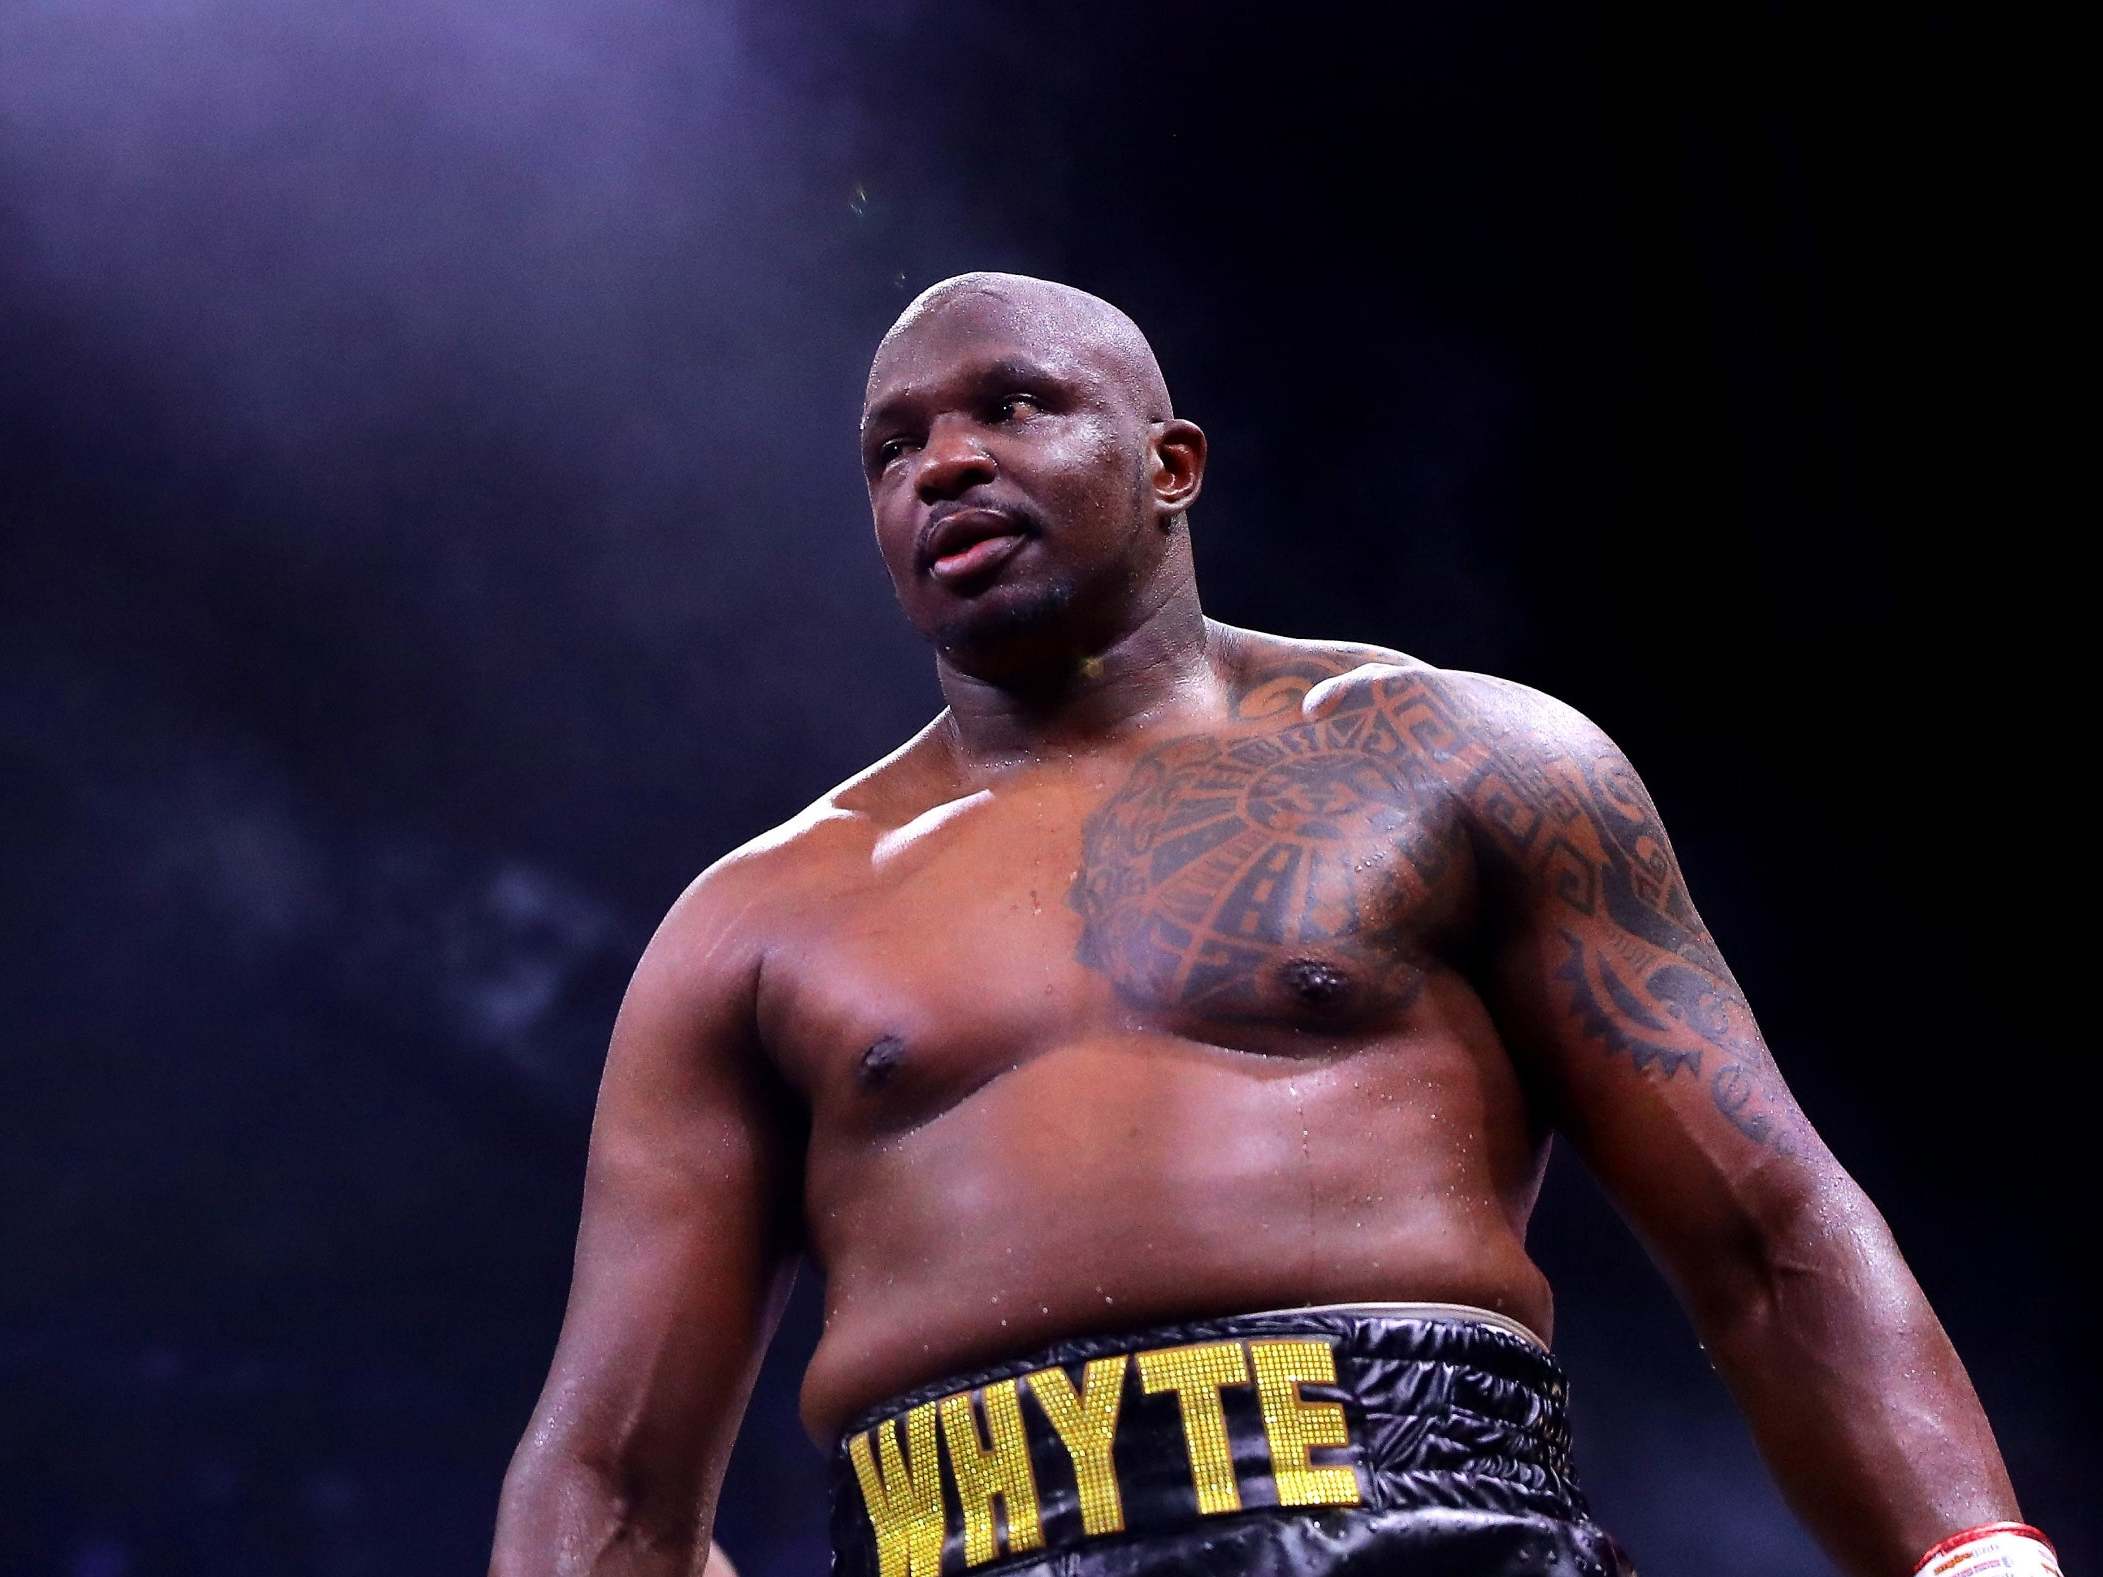 Dillian Whyte believes he would beat Anthony Joshua in a rematch